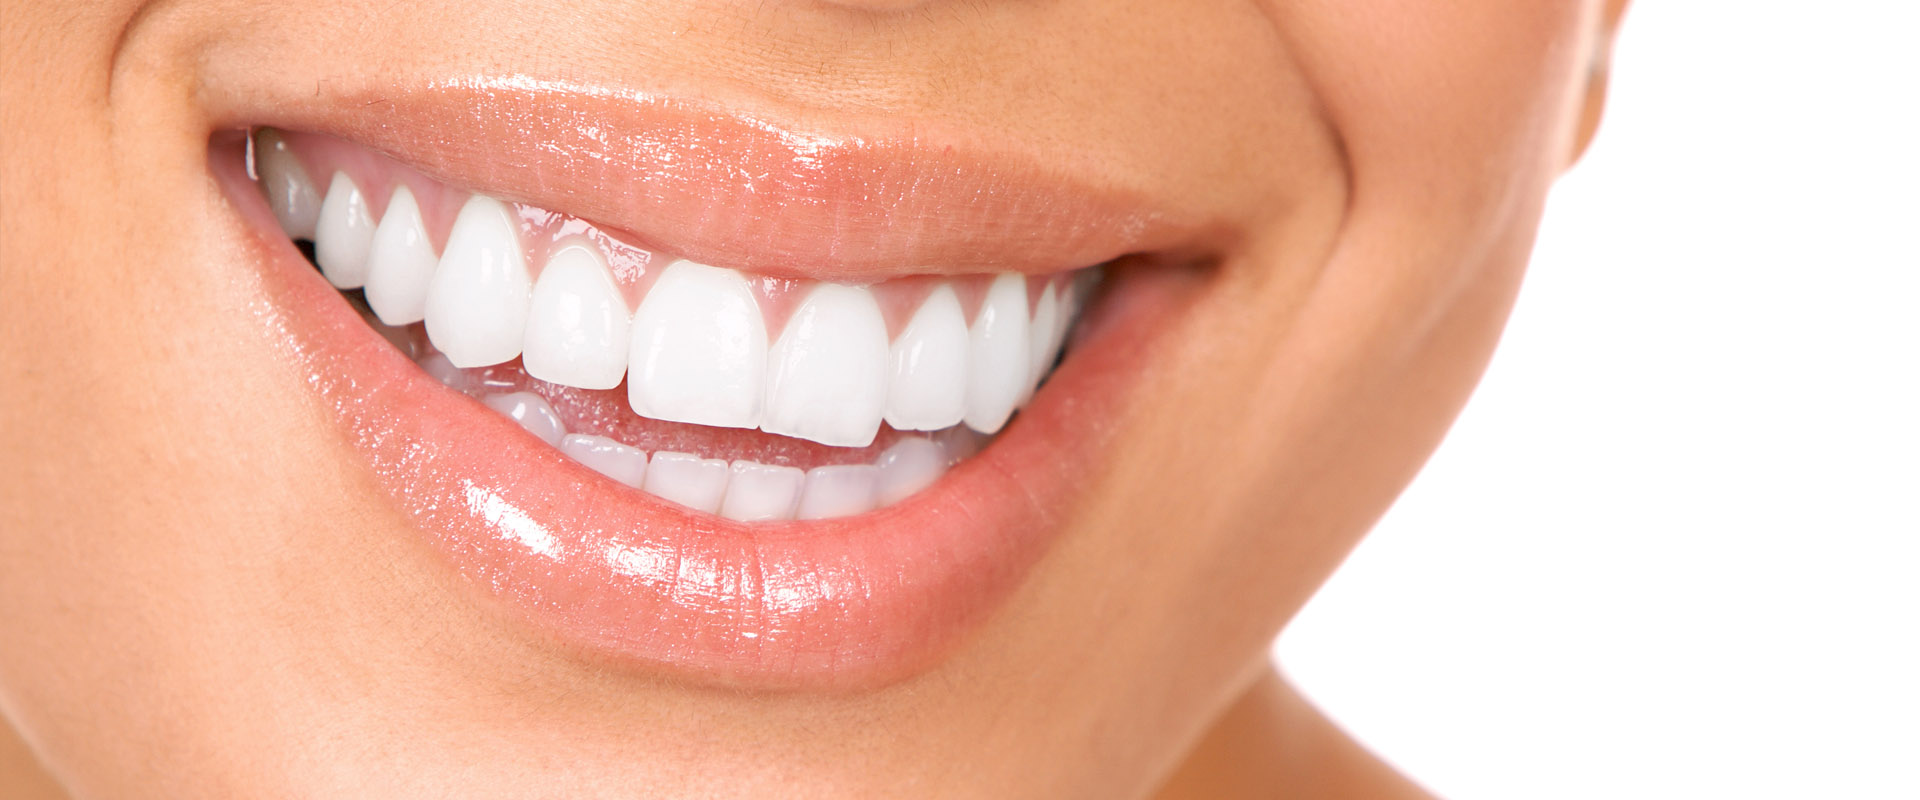 At-home Professional Teeth Whitening - What is the Difference?